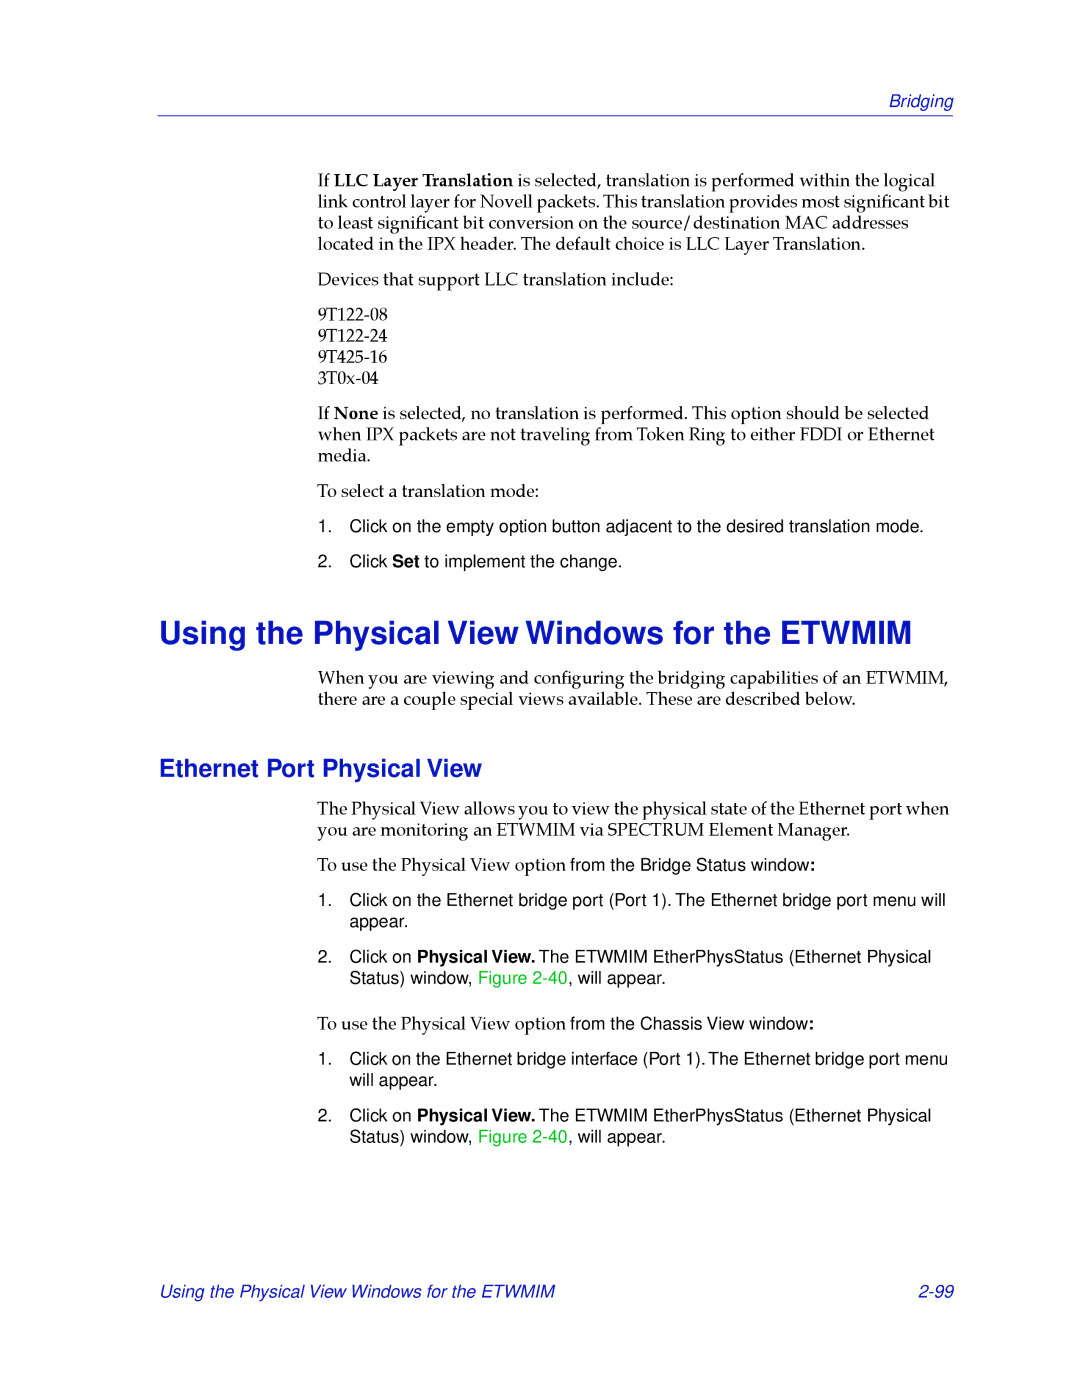 Cabletron Systems 2.2 manual Using the Physical View Windows for the Etwmim, Ethernet Port Physical View 